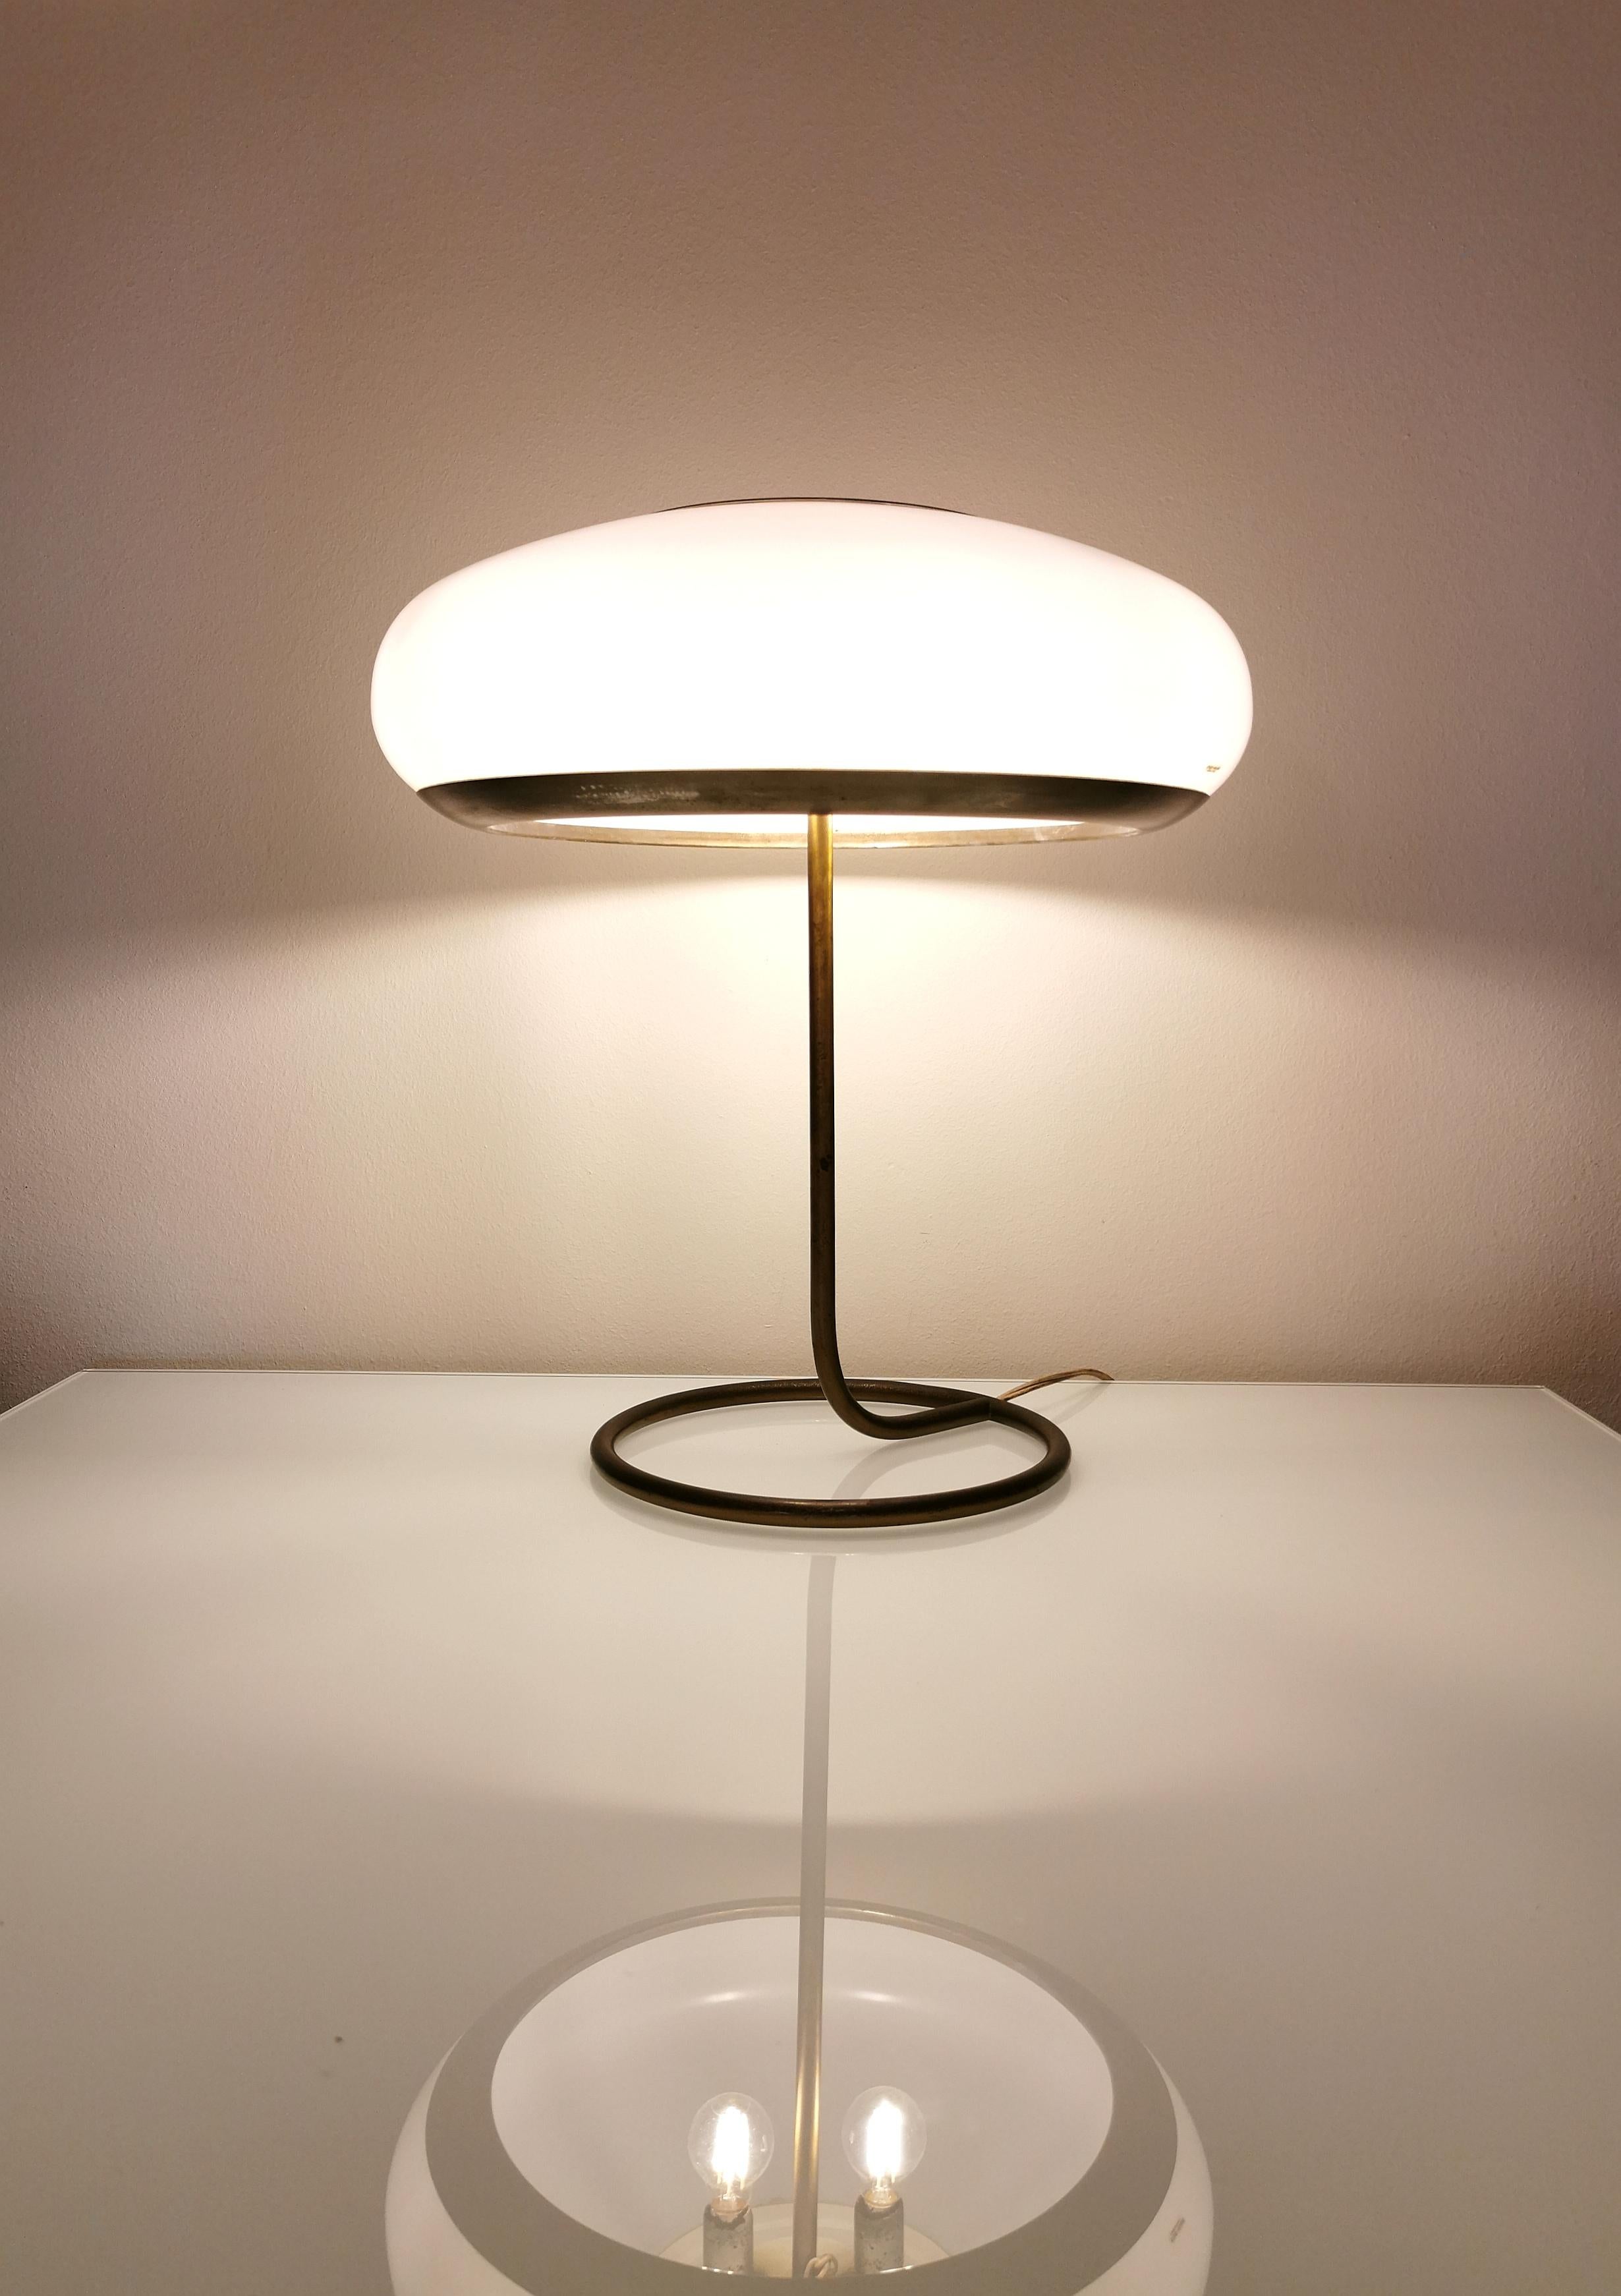 Particular and rare Stilux Milano 2-light table lamp with white Plexiglass diffuser and brass structure and aluminum diffuser disk, 1950s.